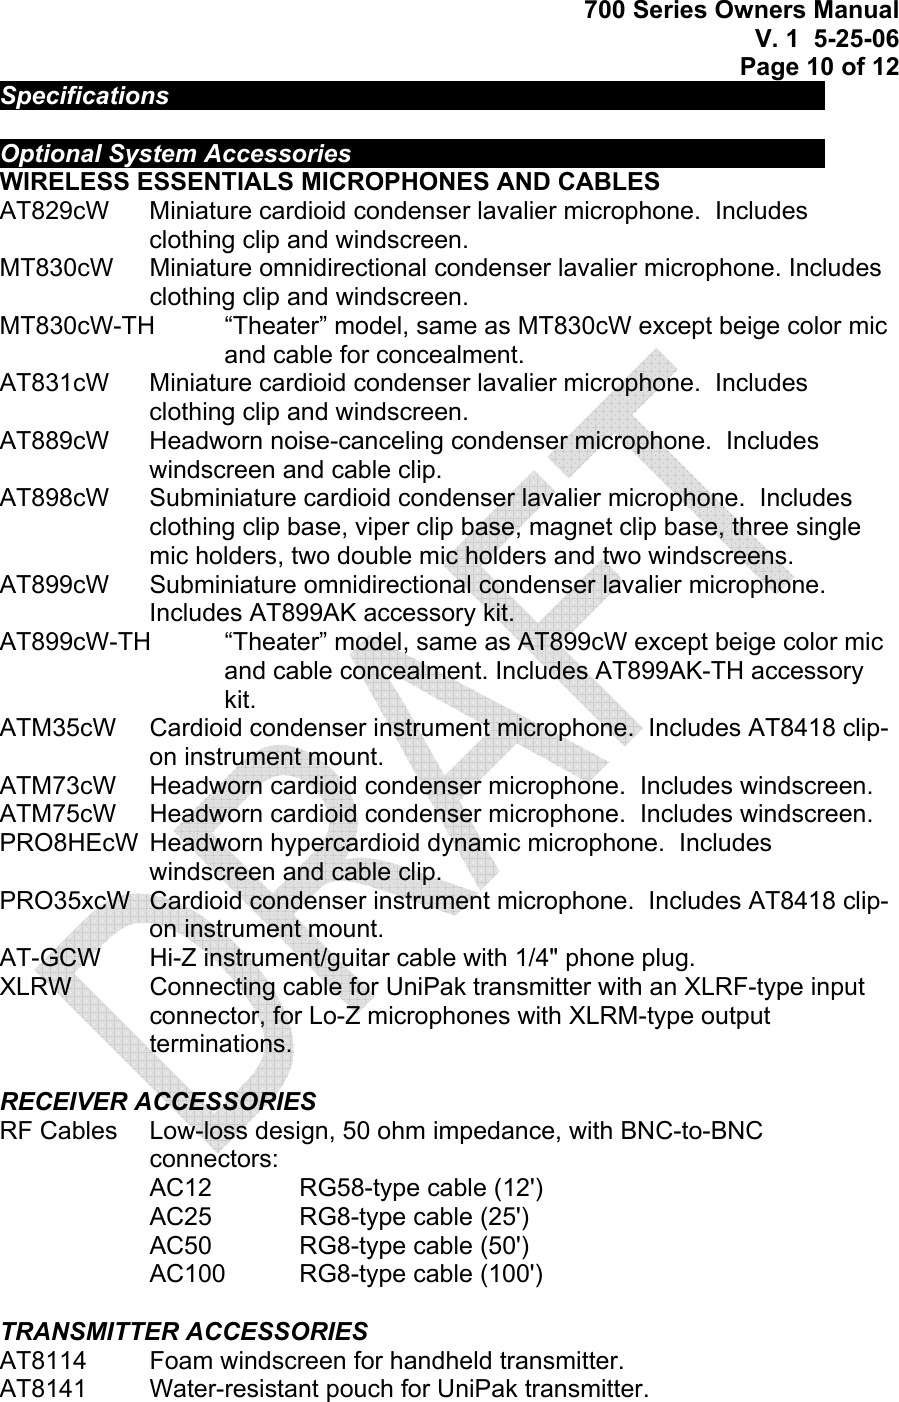 700 Series Owners Manual V. 1  5-25-06 Page 10 of 12 Specifications             Optional System Accessories          WIRELESS ESSENTIALS MICROPHONES AND CABLES  AT829cW   Miniature cardioid condenser lavalier microphone.  Includes clothing clip and windscreen. MT830cW   Miniature omnidirectional condenser lavalier microphone. Includes clothing clip and windscreen. MT830cW-TH   “Theater” model, same as MT830cW except beige color mic and cable for concealment. AT831cW   Miniature cardioid condenser lavalier microphone.  Includes clothing clip and windscreen. AT889cW   Headworn noise-canceling condenser microphone.  Includes windscreen and cable clip. AT898cW   Subminiature cardioid condenser lavalier microphone.  Includes clothing clip base, viper clip base, magnet clip base, three single mic holders, two double mic holders and two windscreens. AT899cW   Subminiature omnidirectional condenser lavalier microphone.  Includes AT899AK accessory kit. AT899cW-TH   “Theater” model, same as AT899cW except beige color mic and cable concealment. Includes AT899AK-TH accessory kit. ATM35cW   Cardioid condenser instrument microphone.  Includes AT8418 clip-on instrument mount. ATM73cW   Headworn cardioid condenser microphone.  Includes windscreen. ATM75cW   Headworn cardioid condenser microphone.  Includes windscreen. PRO8HEcW  Headworn hypercardioid dynamic microphone.  Includes windscreen and cable clip. PRO35xcW   Cardioid condenser instrument microphone.  Includes AT8418 clip-on instrument mount. AT-GCW   Hi-Z instrument/guitar cable with 1/4&quot; phone plug. XLRW   Connecting cable for UniPak transmitter with an XLRF-type input connector, for Lo-Z microphones with XLRM-type output terminations.  RECEIVER ACCESSORIES RF Cables   Low-loss design, 50 ohm impedance, with BNC-to-BNC connectors: AC12    RG58-type cable (12&apos;) AC25    RG8-type cable (25&apos;) AC50    RG8-type cable (50&apos;) AC100   RG8-type cable (100&apos;)  TRANSMITTER ACCESSORIES AT8114   Foam windscreen for handheld transmitter. AT8141   Water-resistant pouch for UniPak transmitter. 